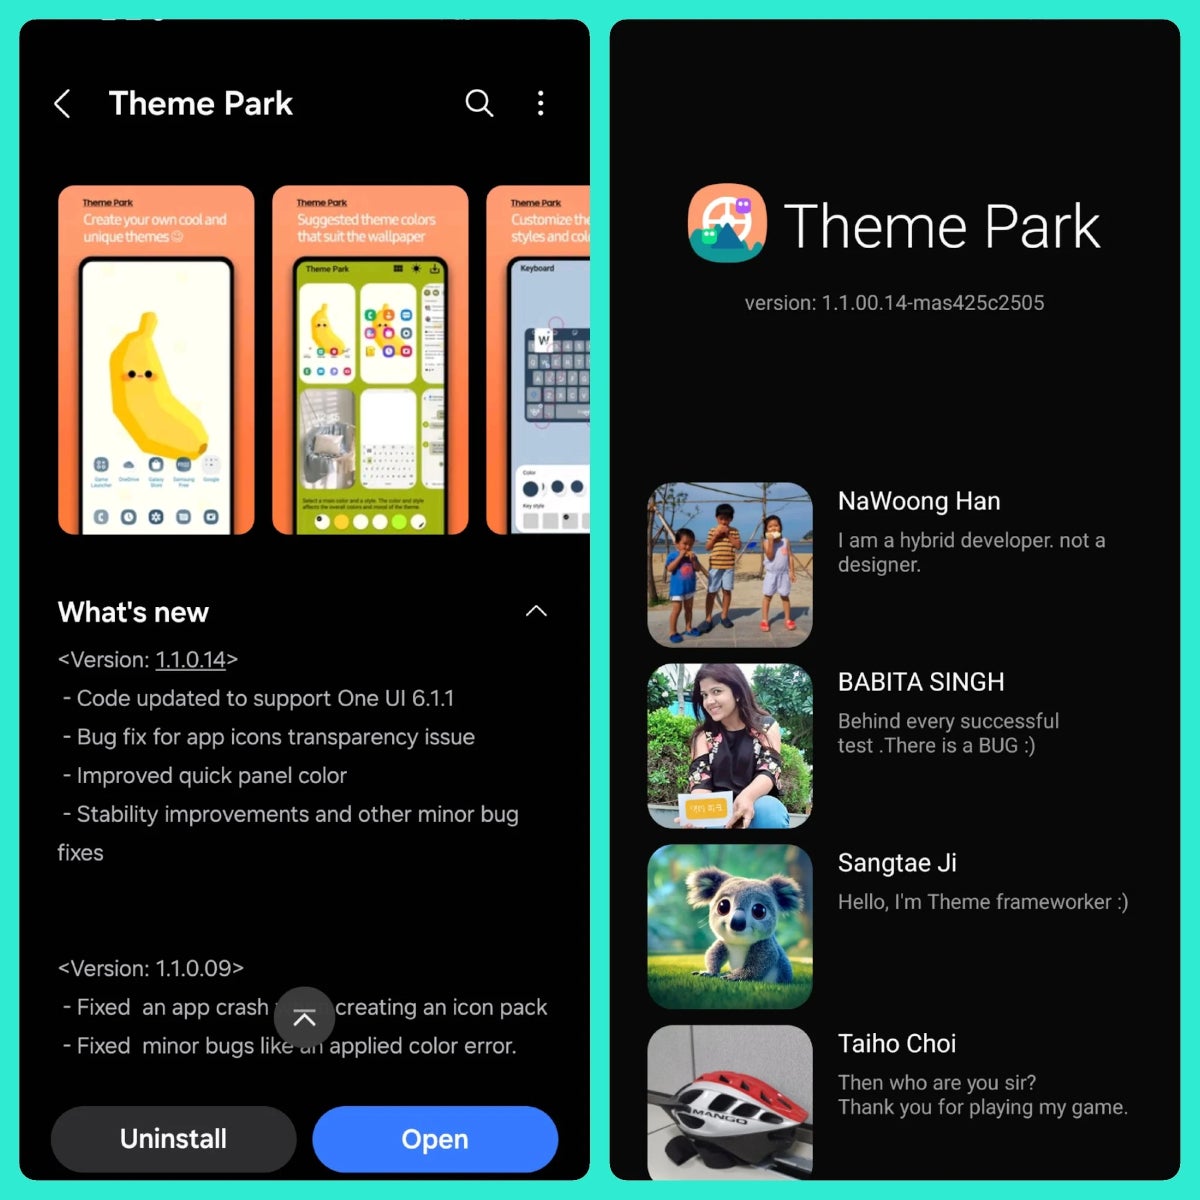 Theme Park update adds One UI 6.1.1 support, Credits - SamMobile - Samsung’s apps getting One UI 6.1.1 support ahead of Galaxy Z Fold 6's launch